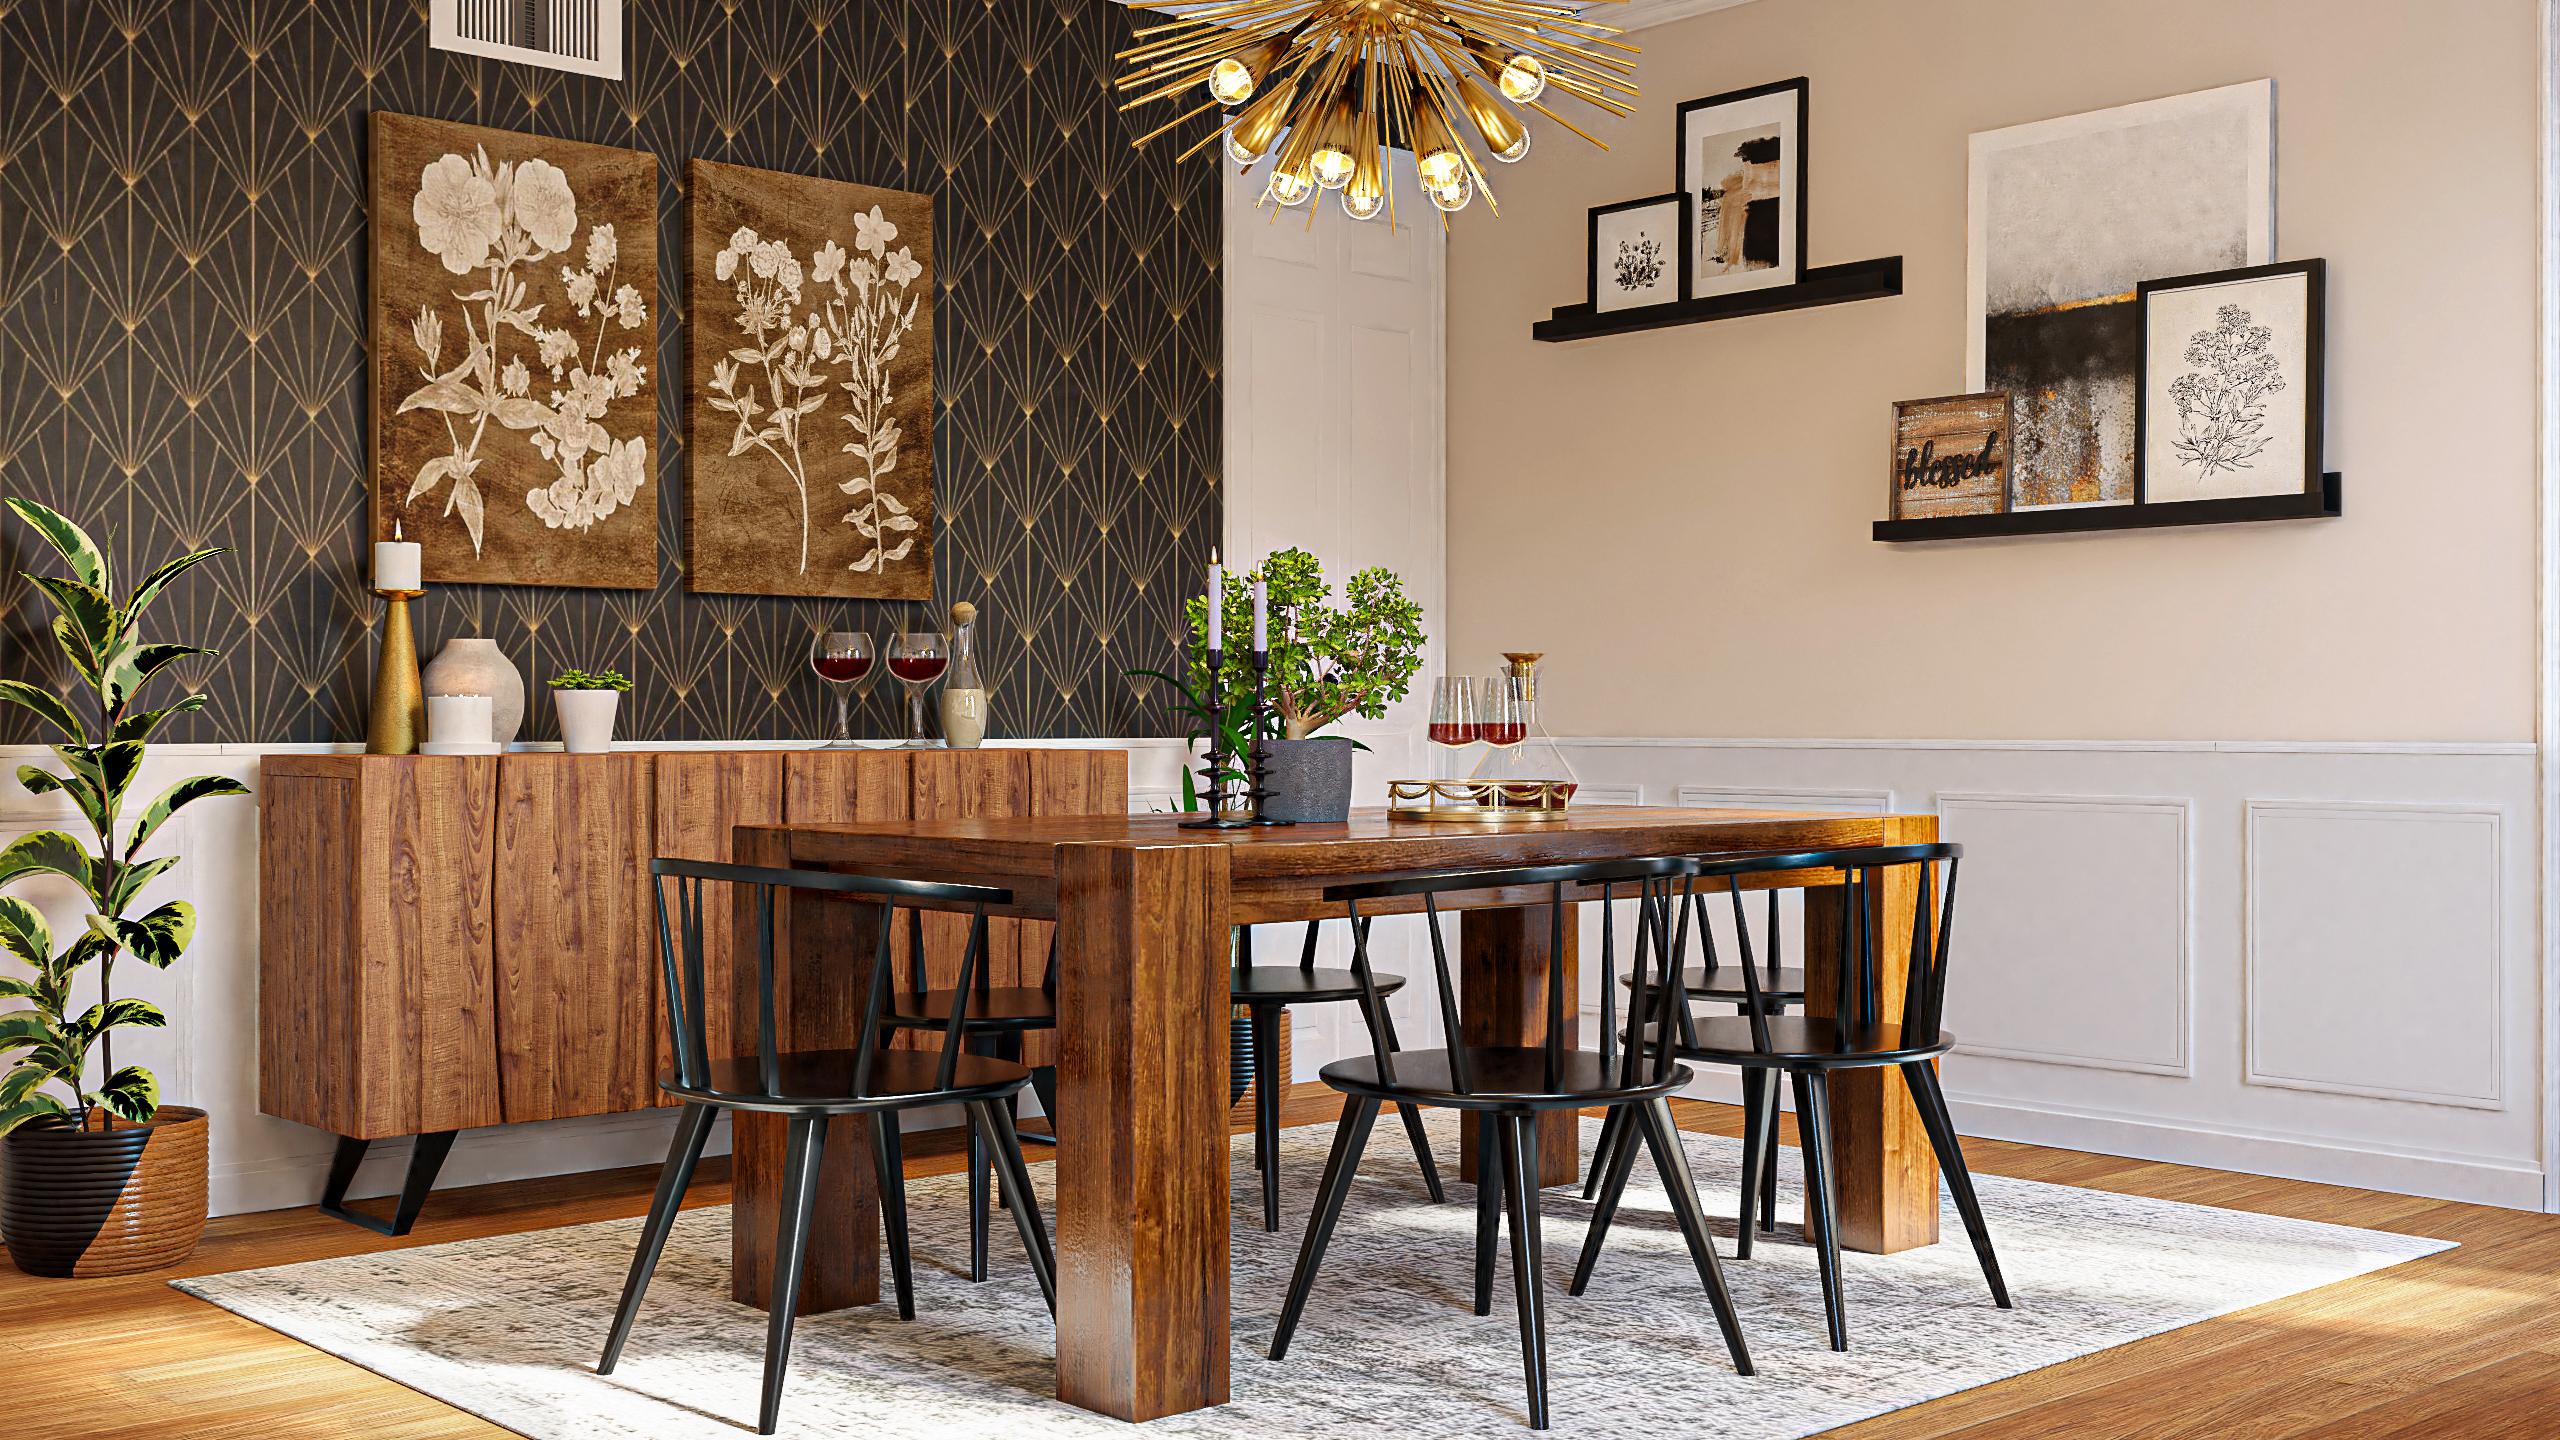 Warm Wood & Gold Complete This Art Deco Dining Room